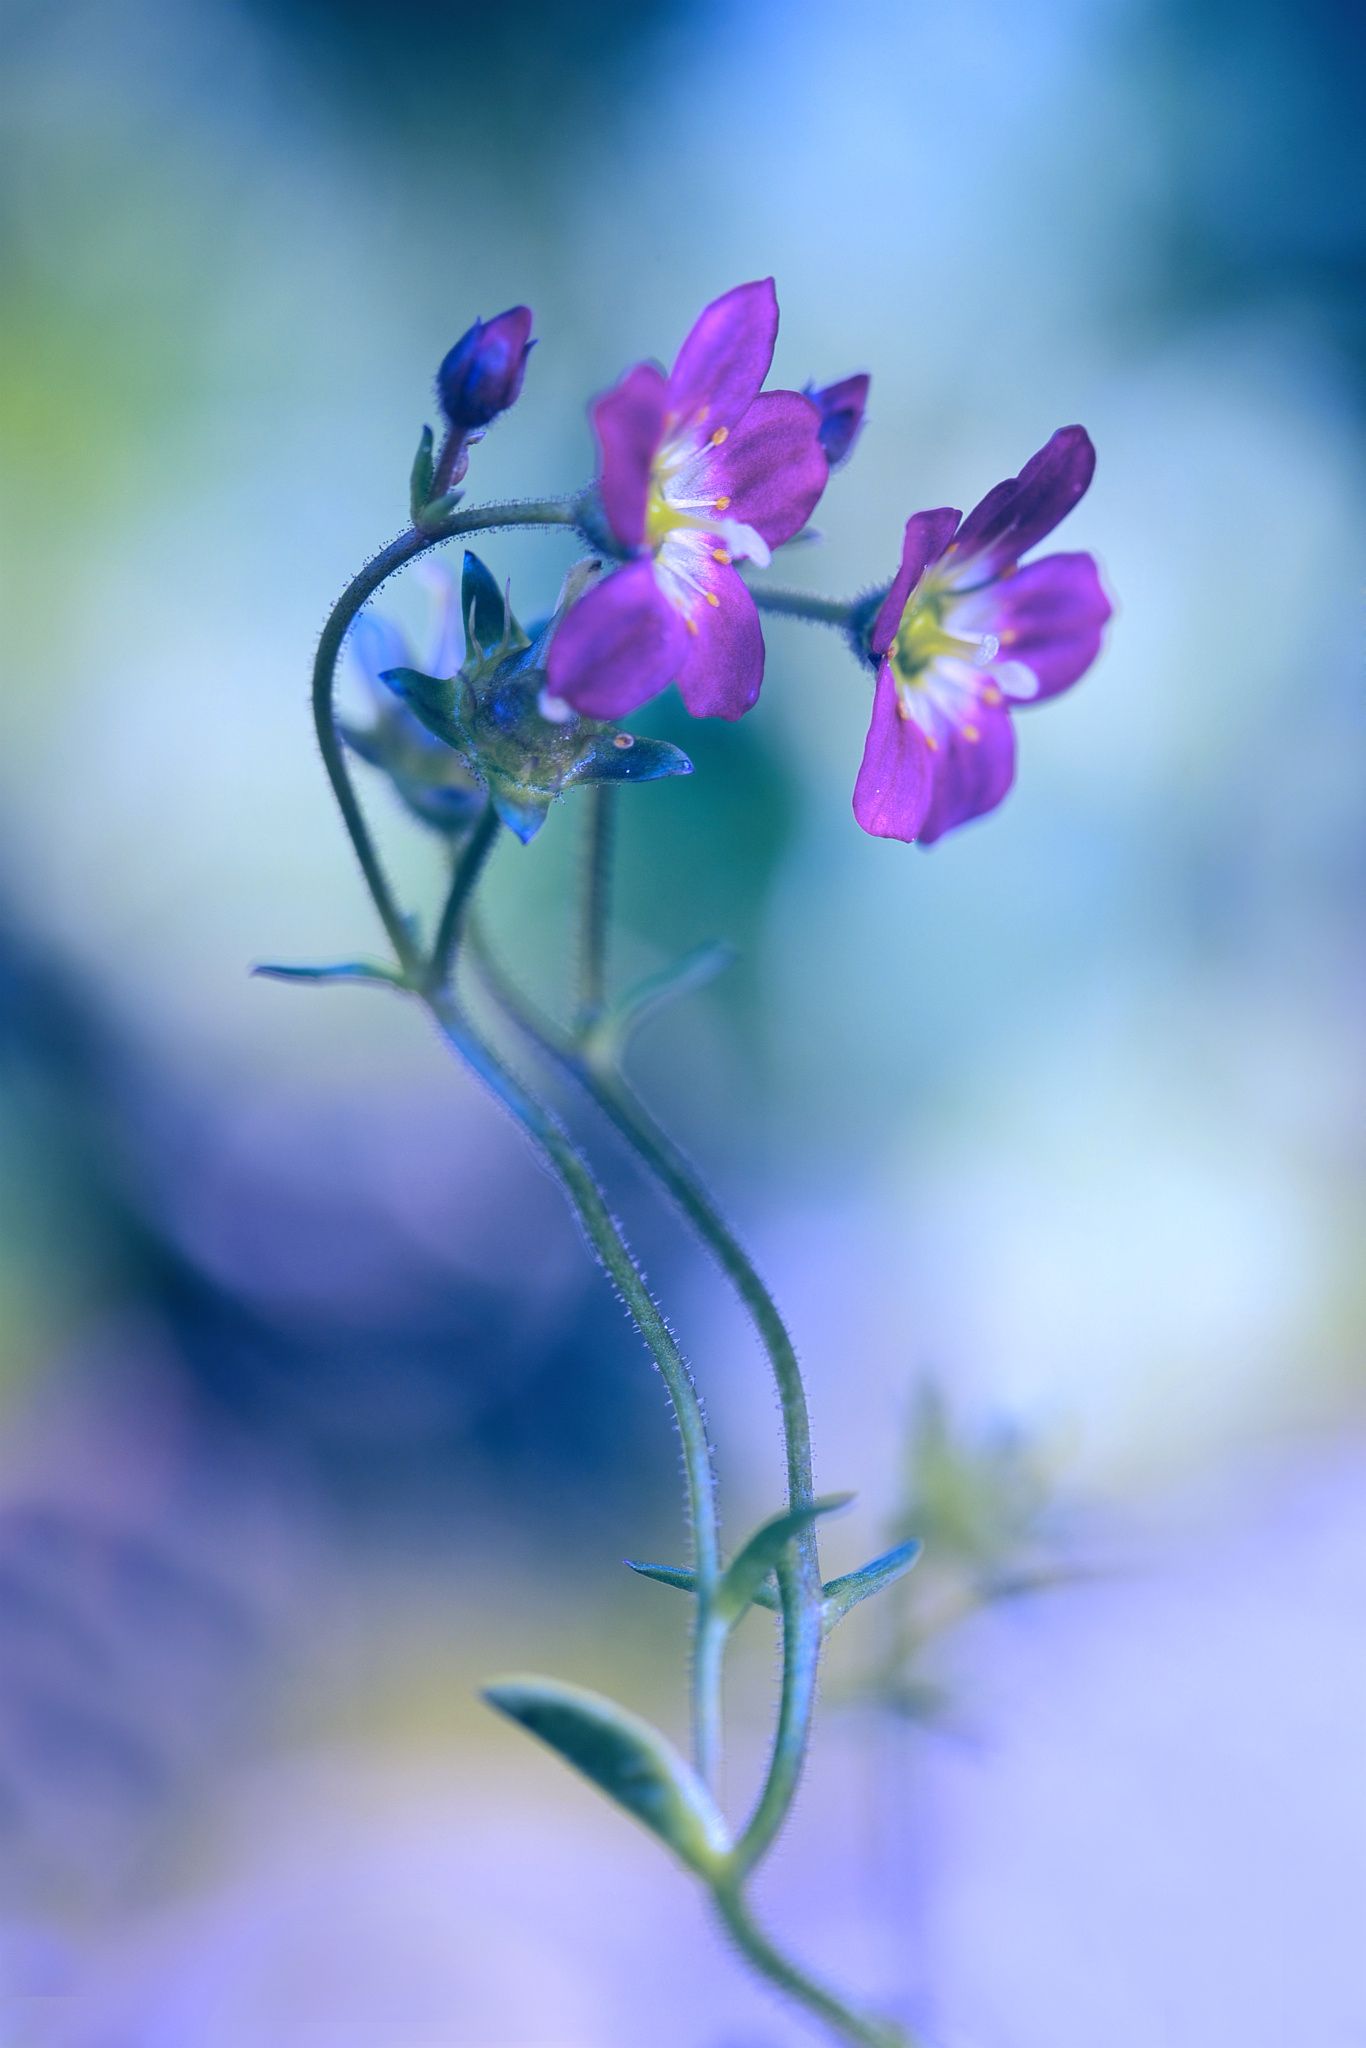 curvy girls by Monique Felber on 500px | My favorite Flowers ...